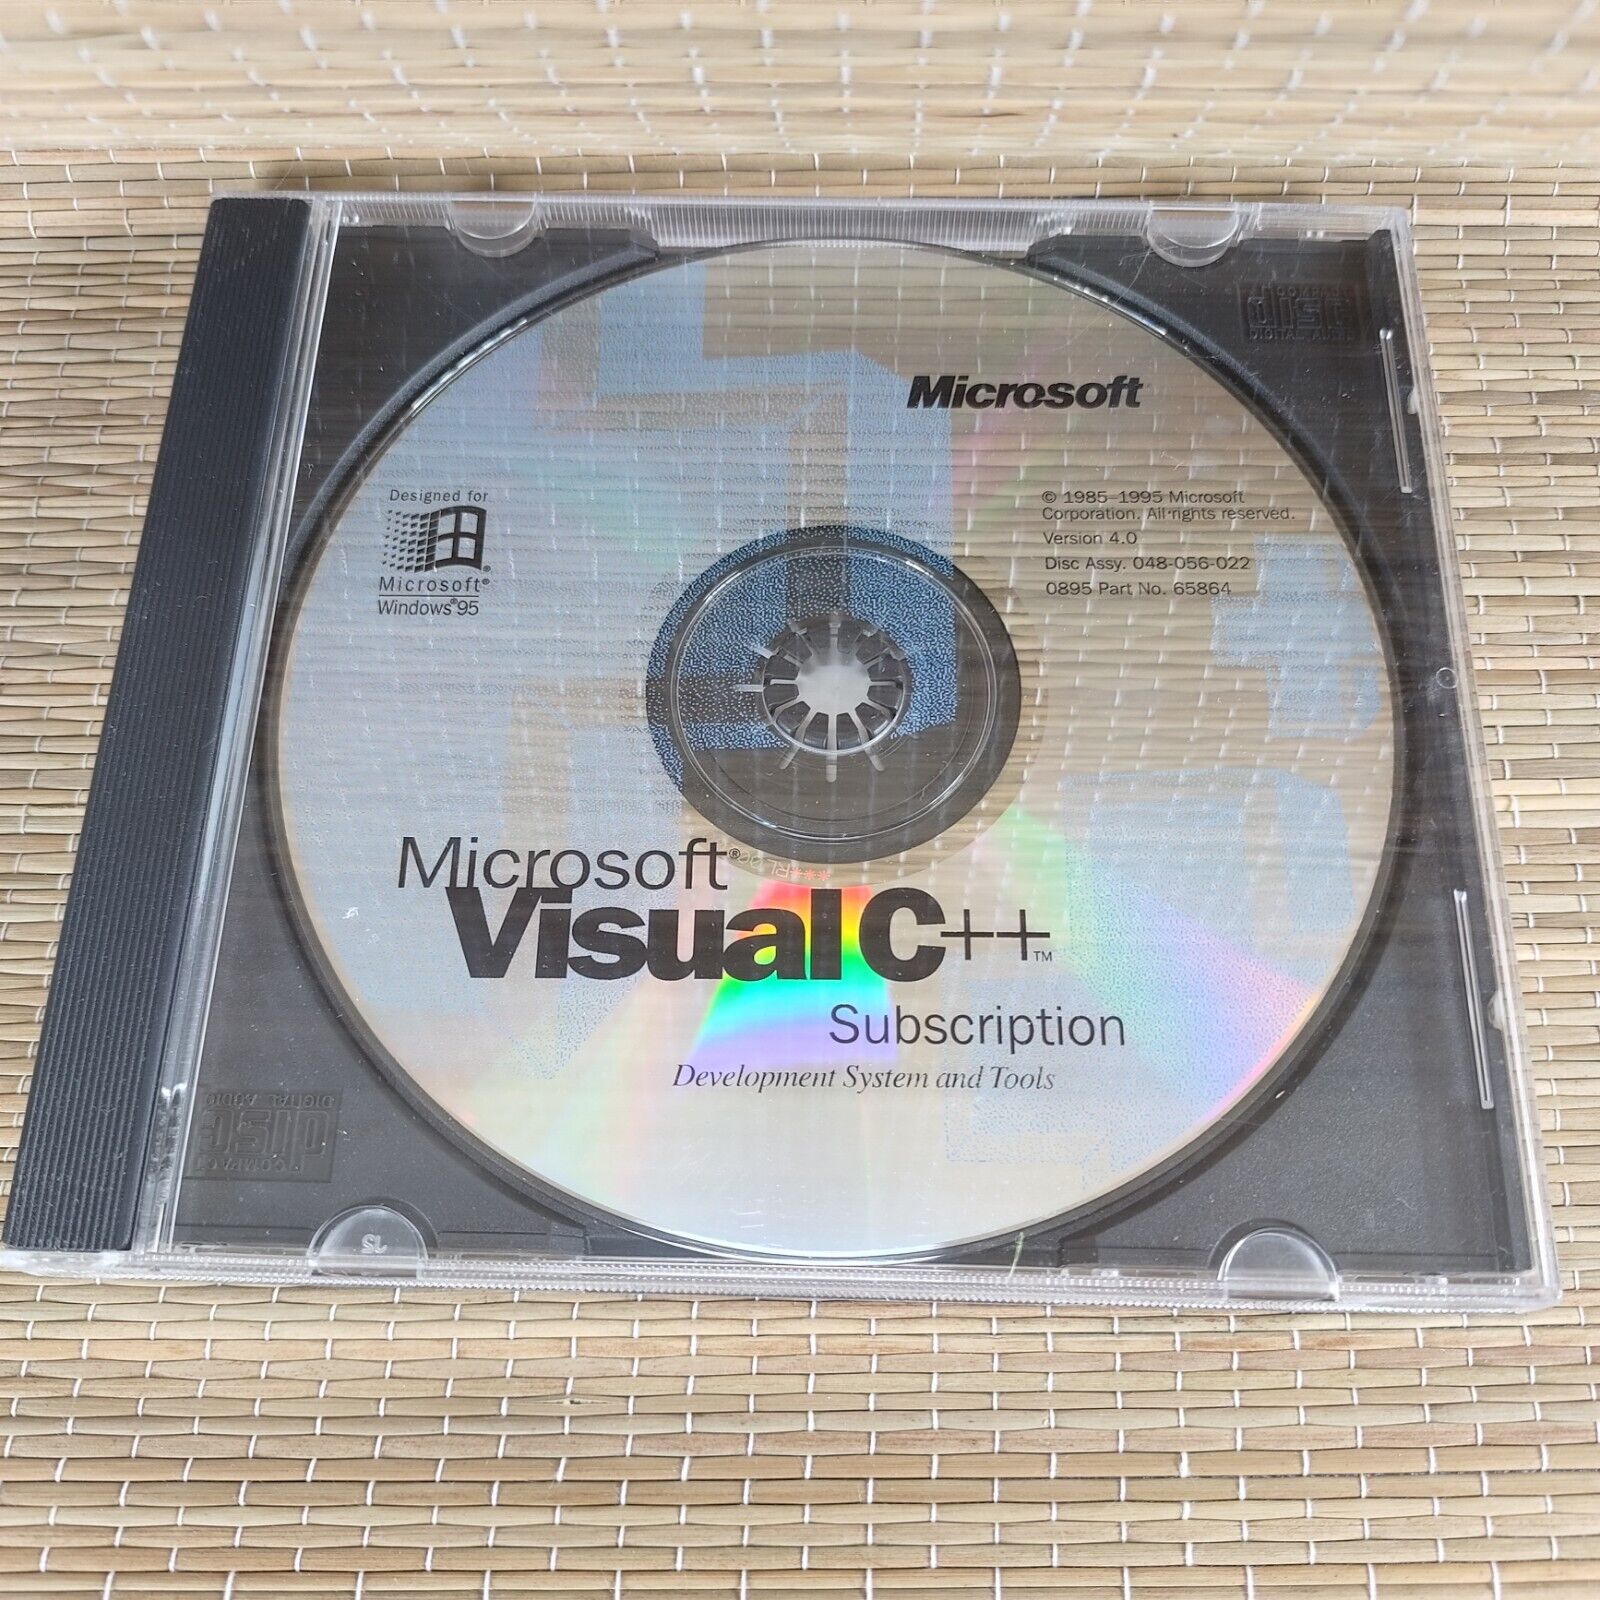 Microsoft Visual C++ Subscription Version 4.0 Software Disk With Key 1995